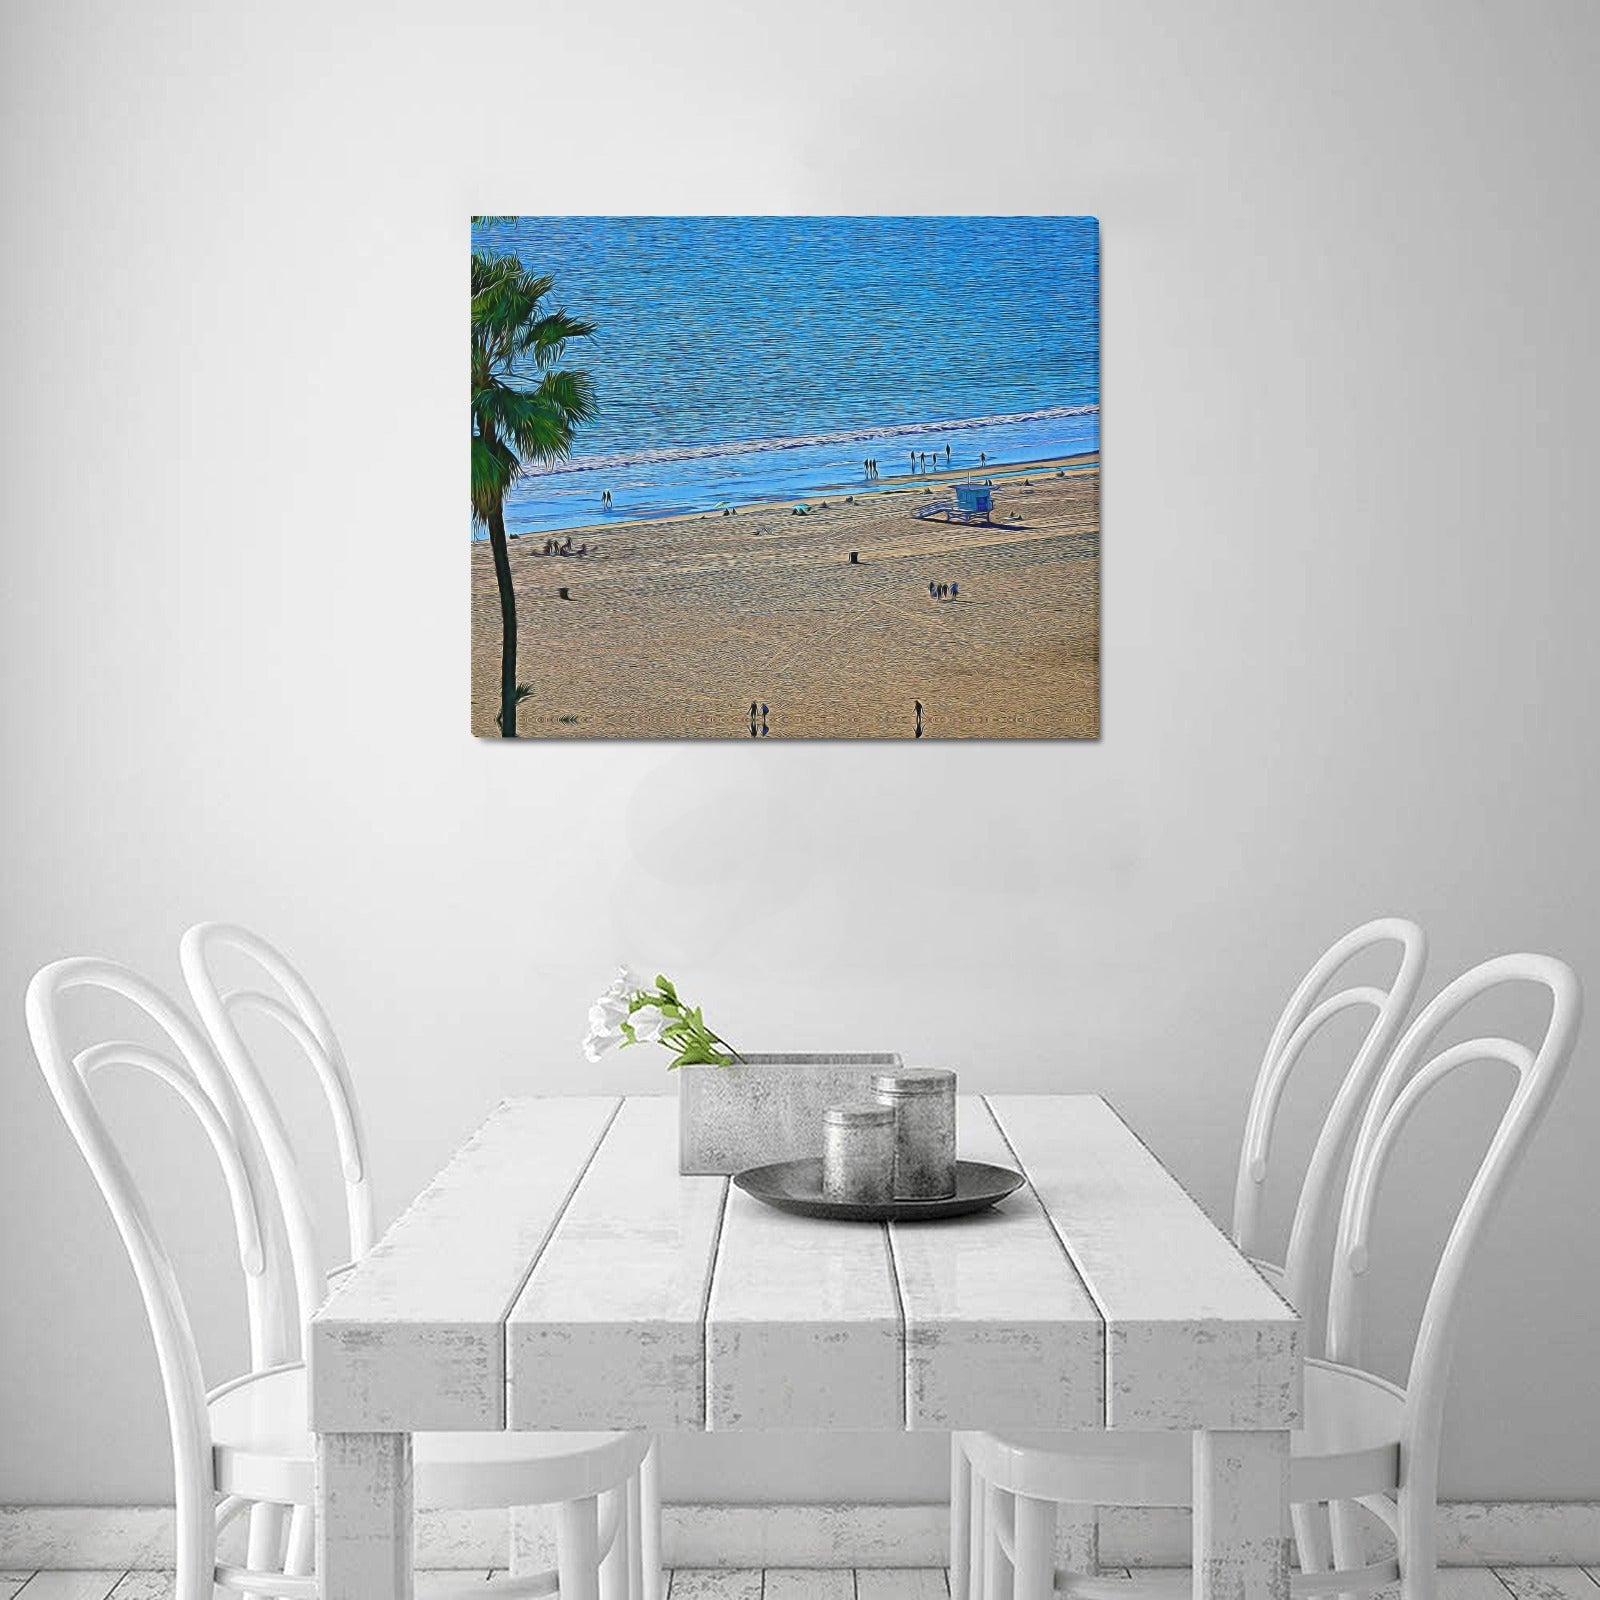 From The Palisades to the Sand into the Ocean | Frame Canvas Print 24"x20"  | Made in the USA | Santa Monica Based Artist - Art Meets Apparel